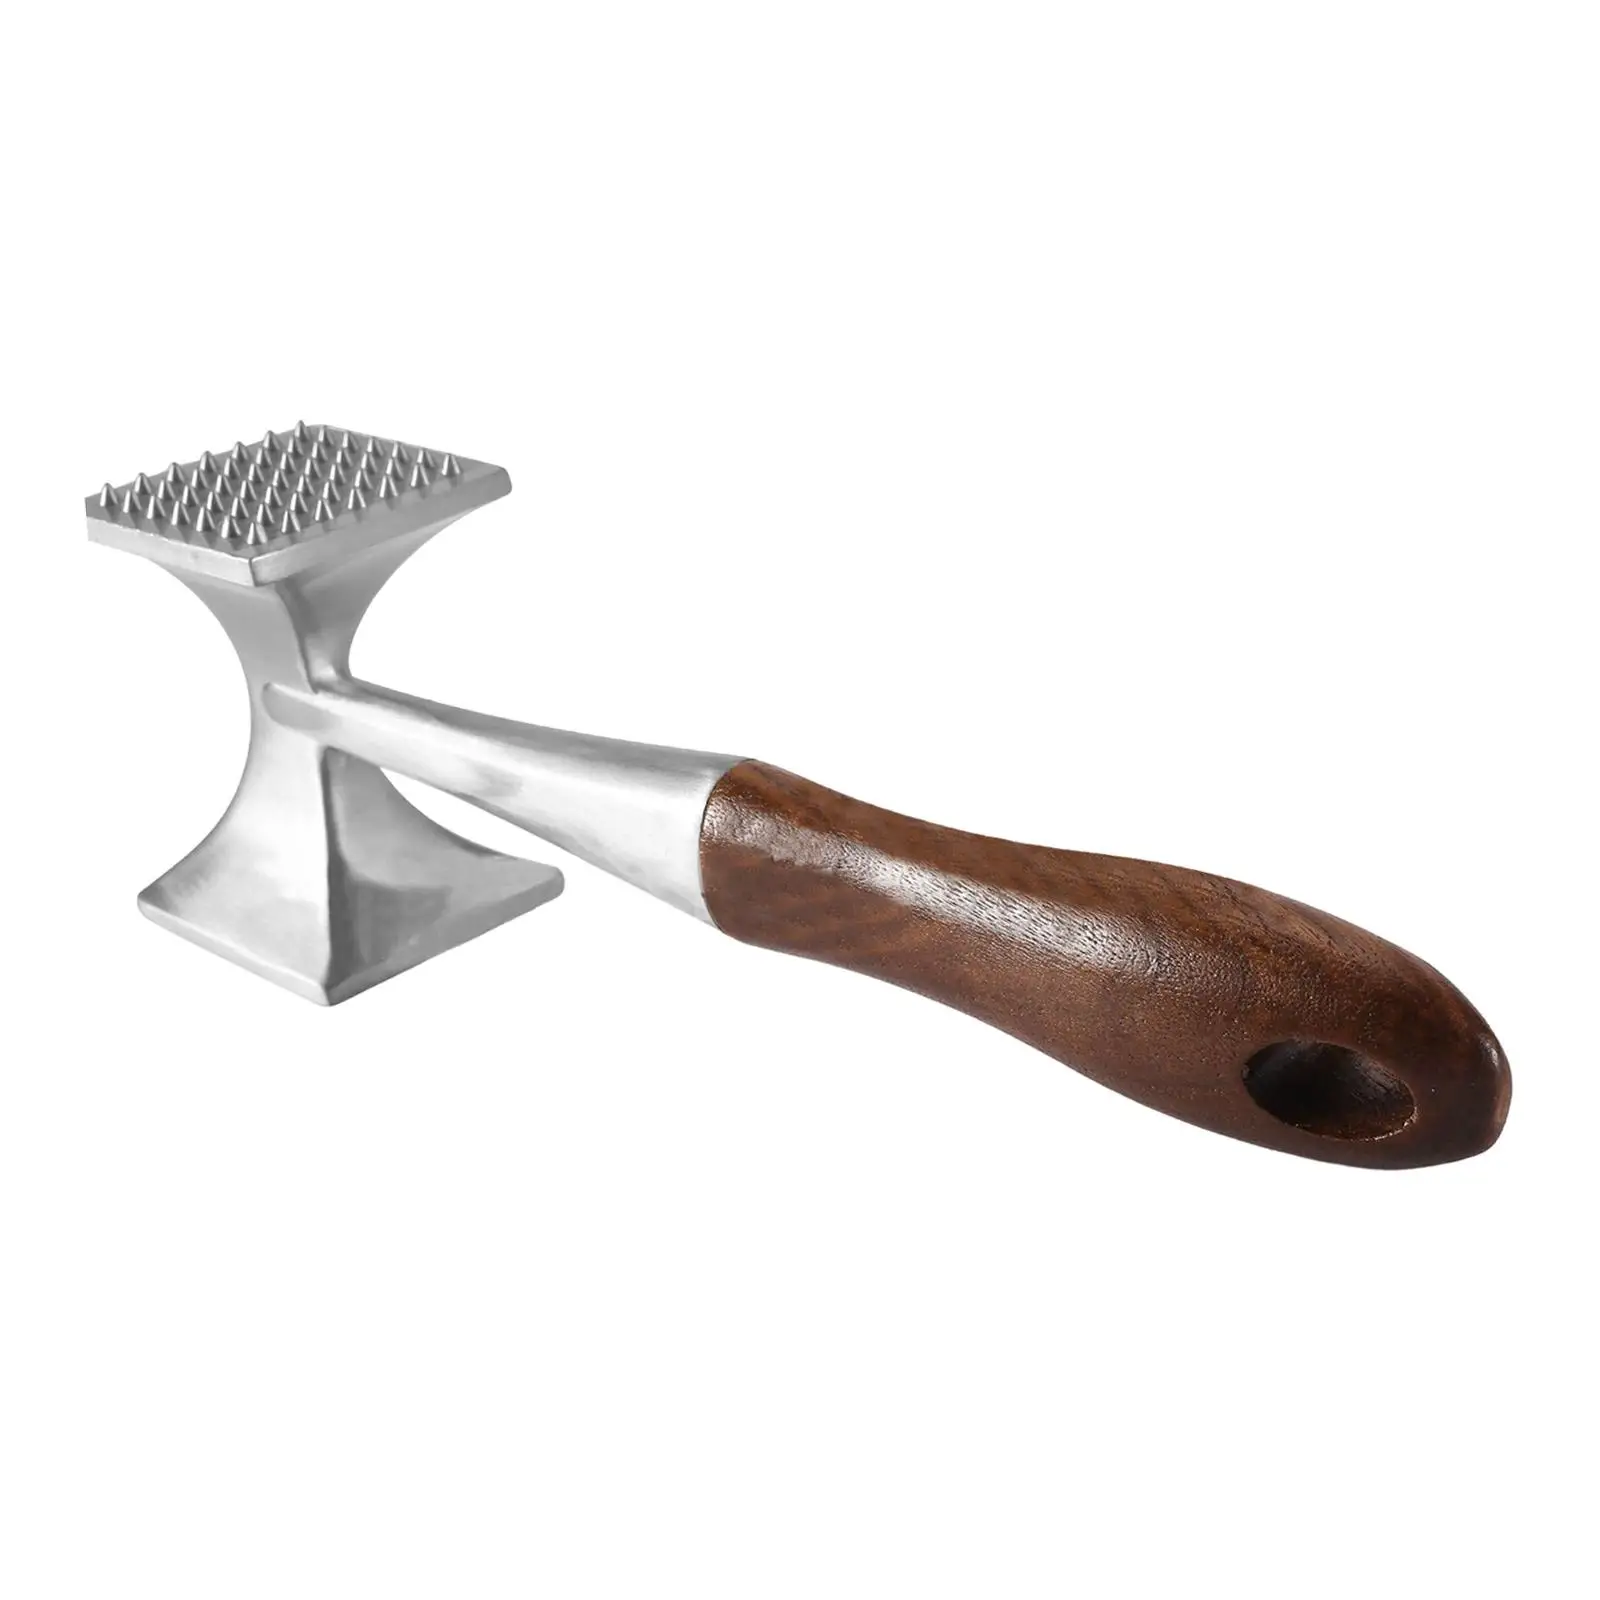 Durable Meat Tenderizer Kitchen Tools Pounder Tools Mallet Ergonomic Handle for Tenderizing Fish Poultry Beef Steak